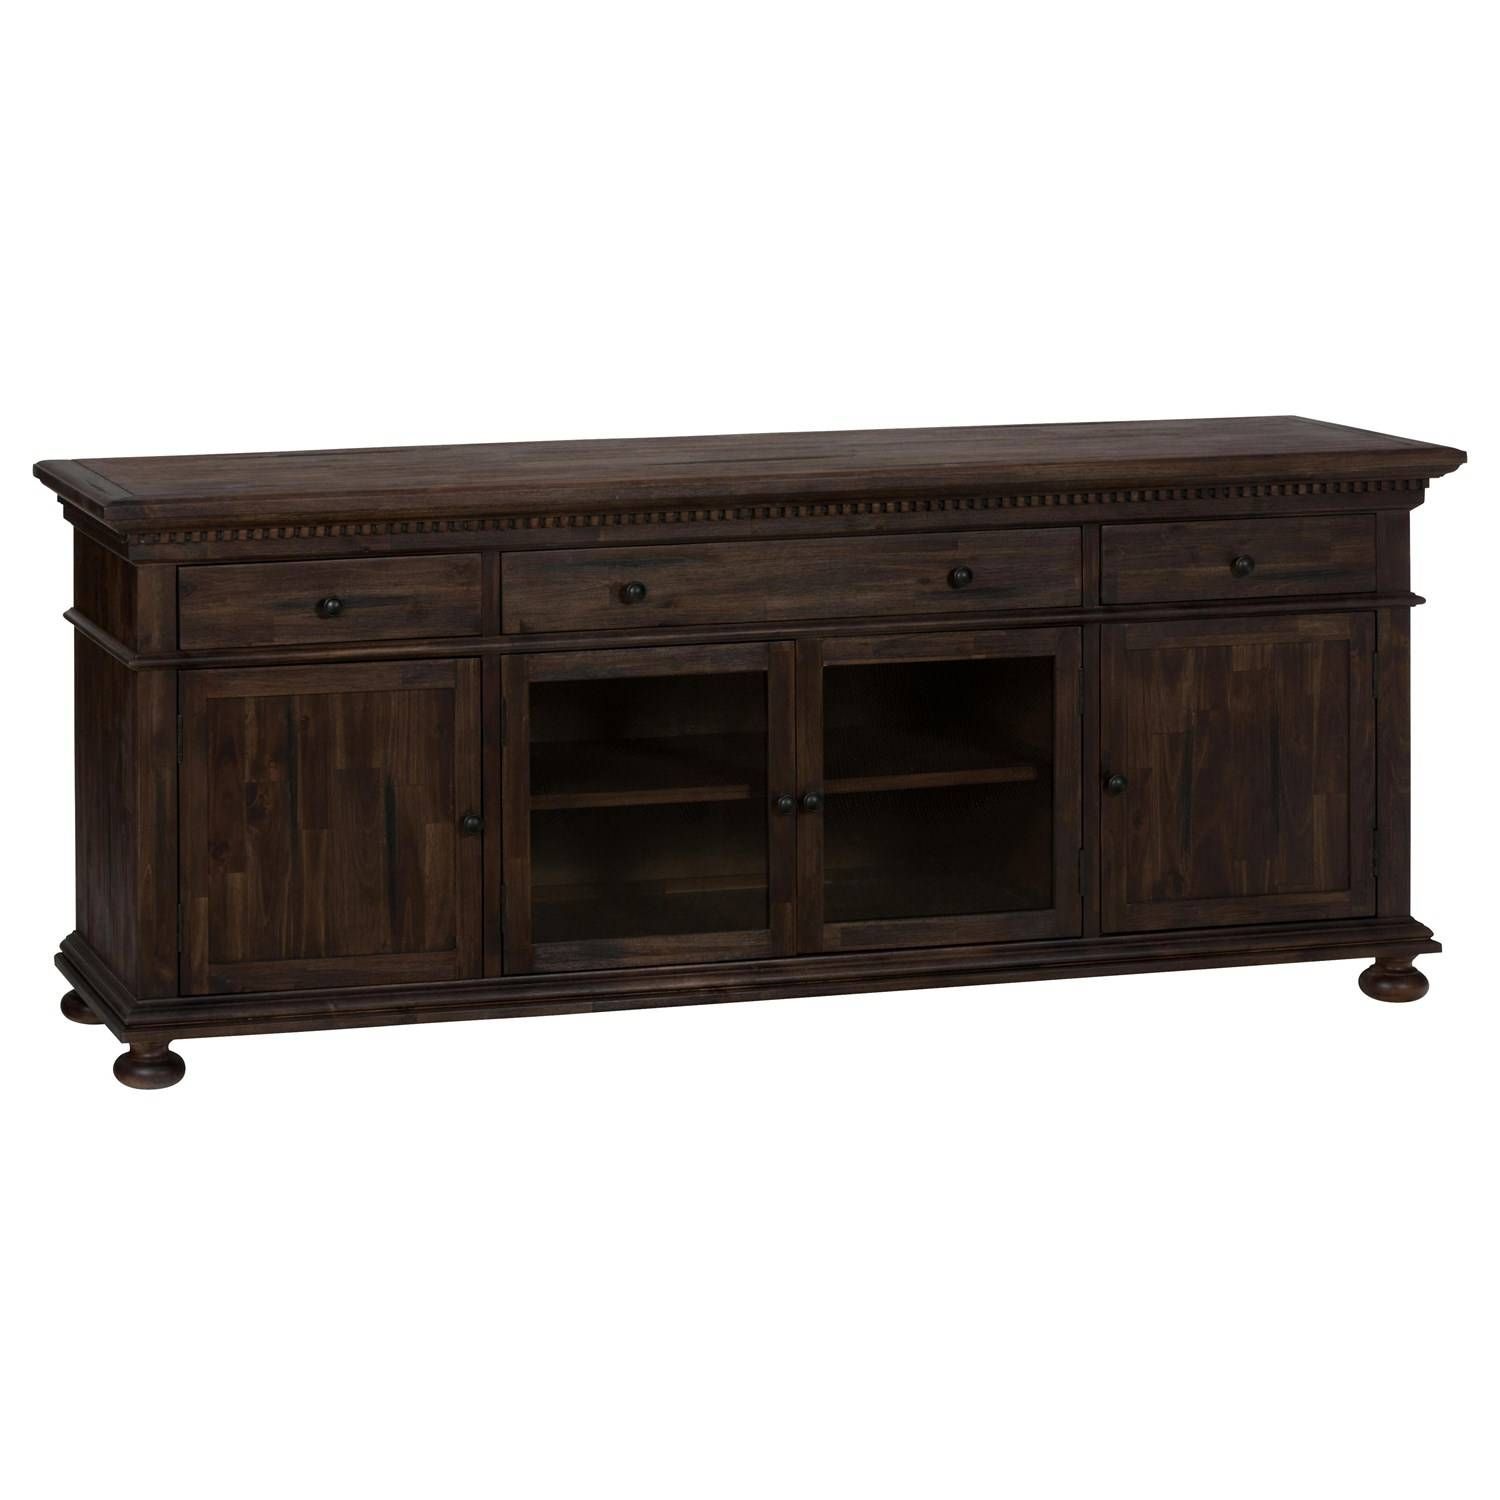 Jofran 679 80 Geneva Hills 80 Multi Purpose Media Cabinet With With Regard To 80 Inch Sideboard (View 16 of 20)